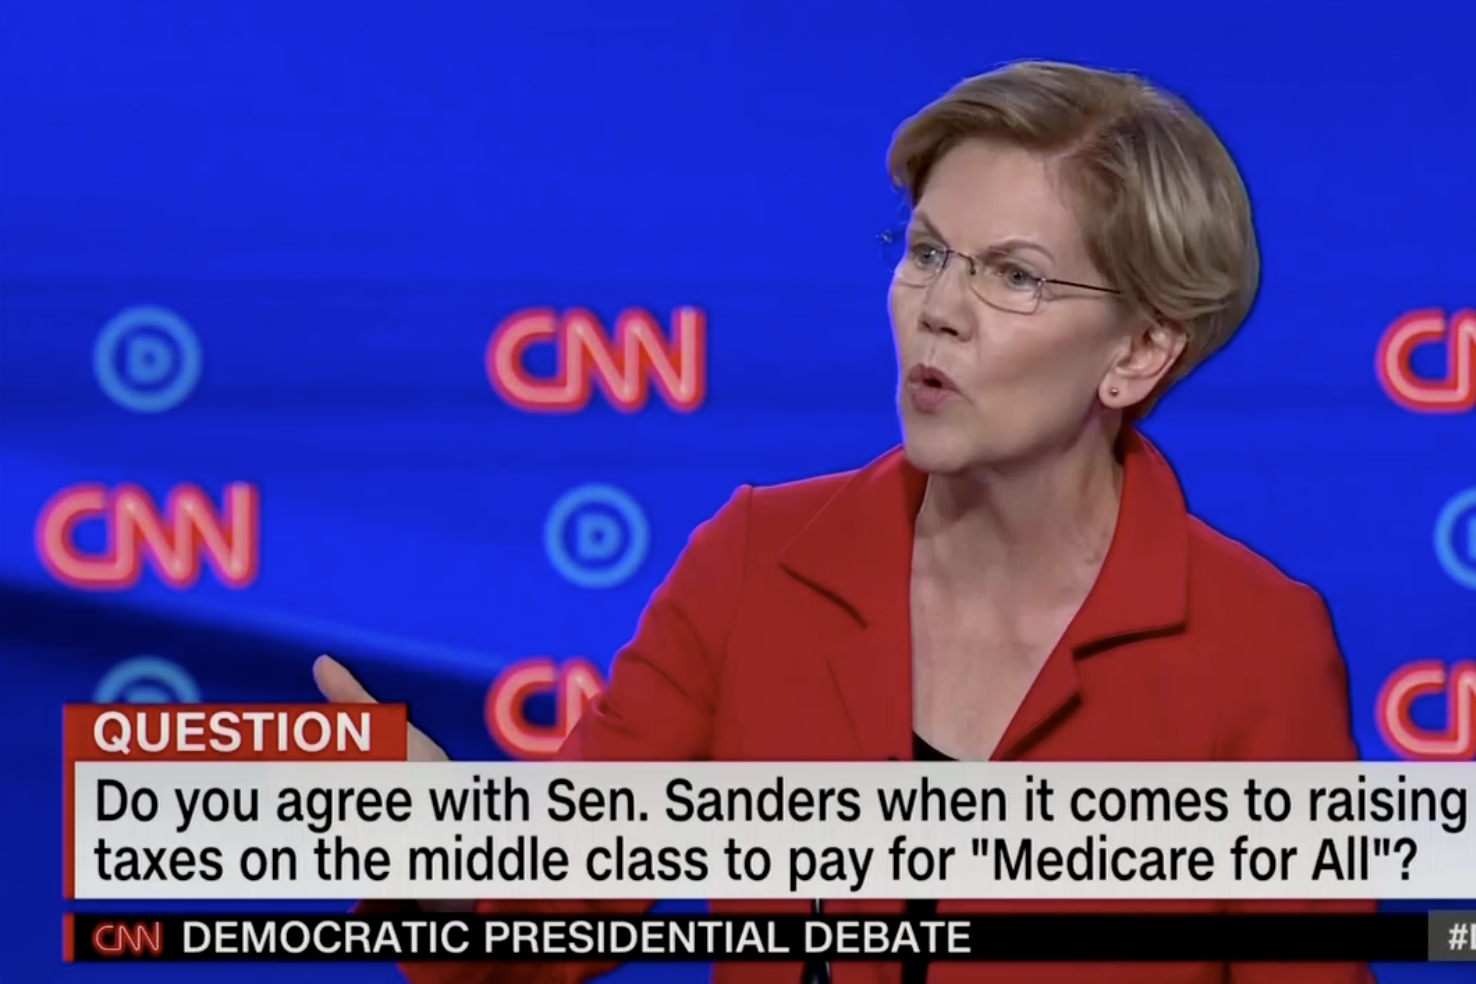 In this screengrab from CNN, Elizabeth Warren debates. The banner reads: "Do you agree with Sen. Sanders when it comes to raising taxes on the middle class to pay for 'Medicare for All'?"